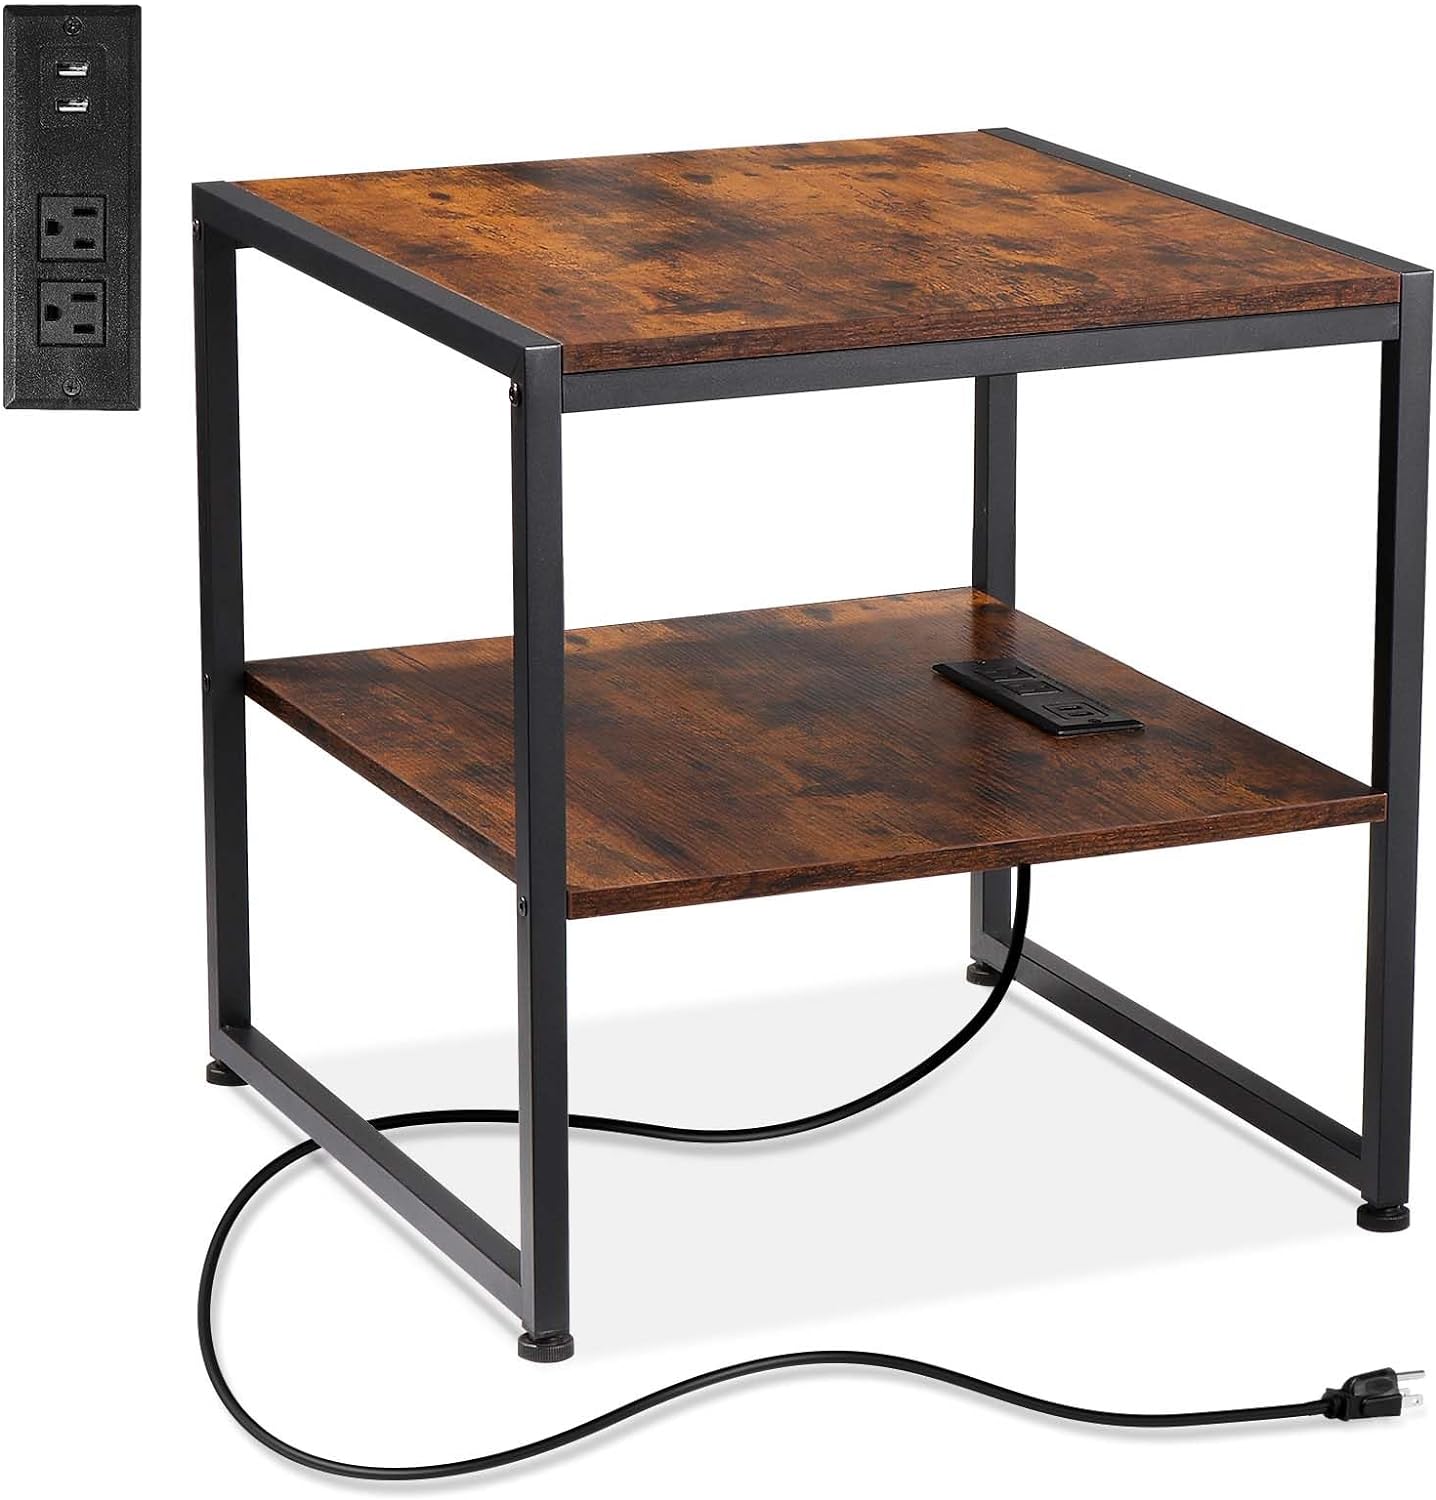 20 End Table with Charging Station, Industrial Square Side Table with USB Ports & Outlets, Versatile 2-Tier Small Nightstand for Bedroom Living Room, Rustic Brown